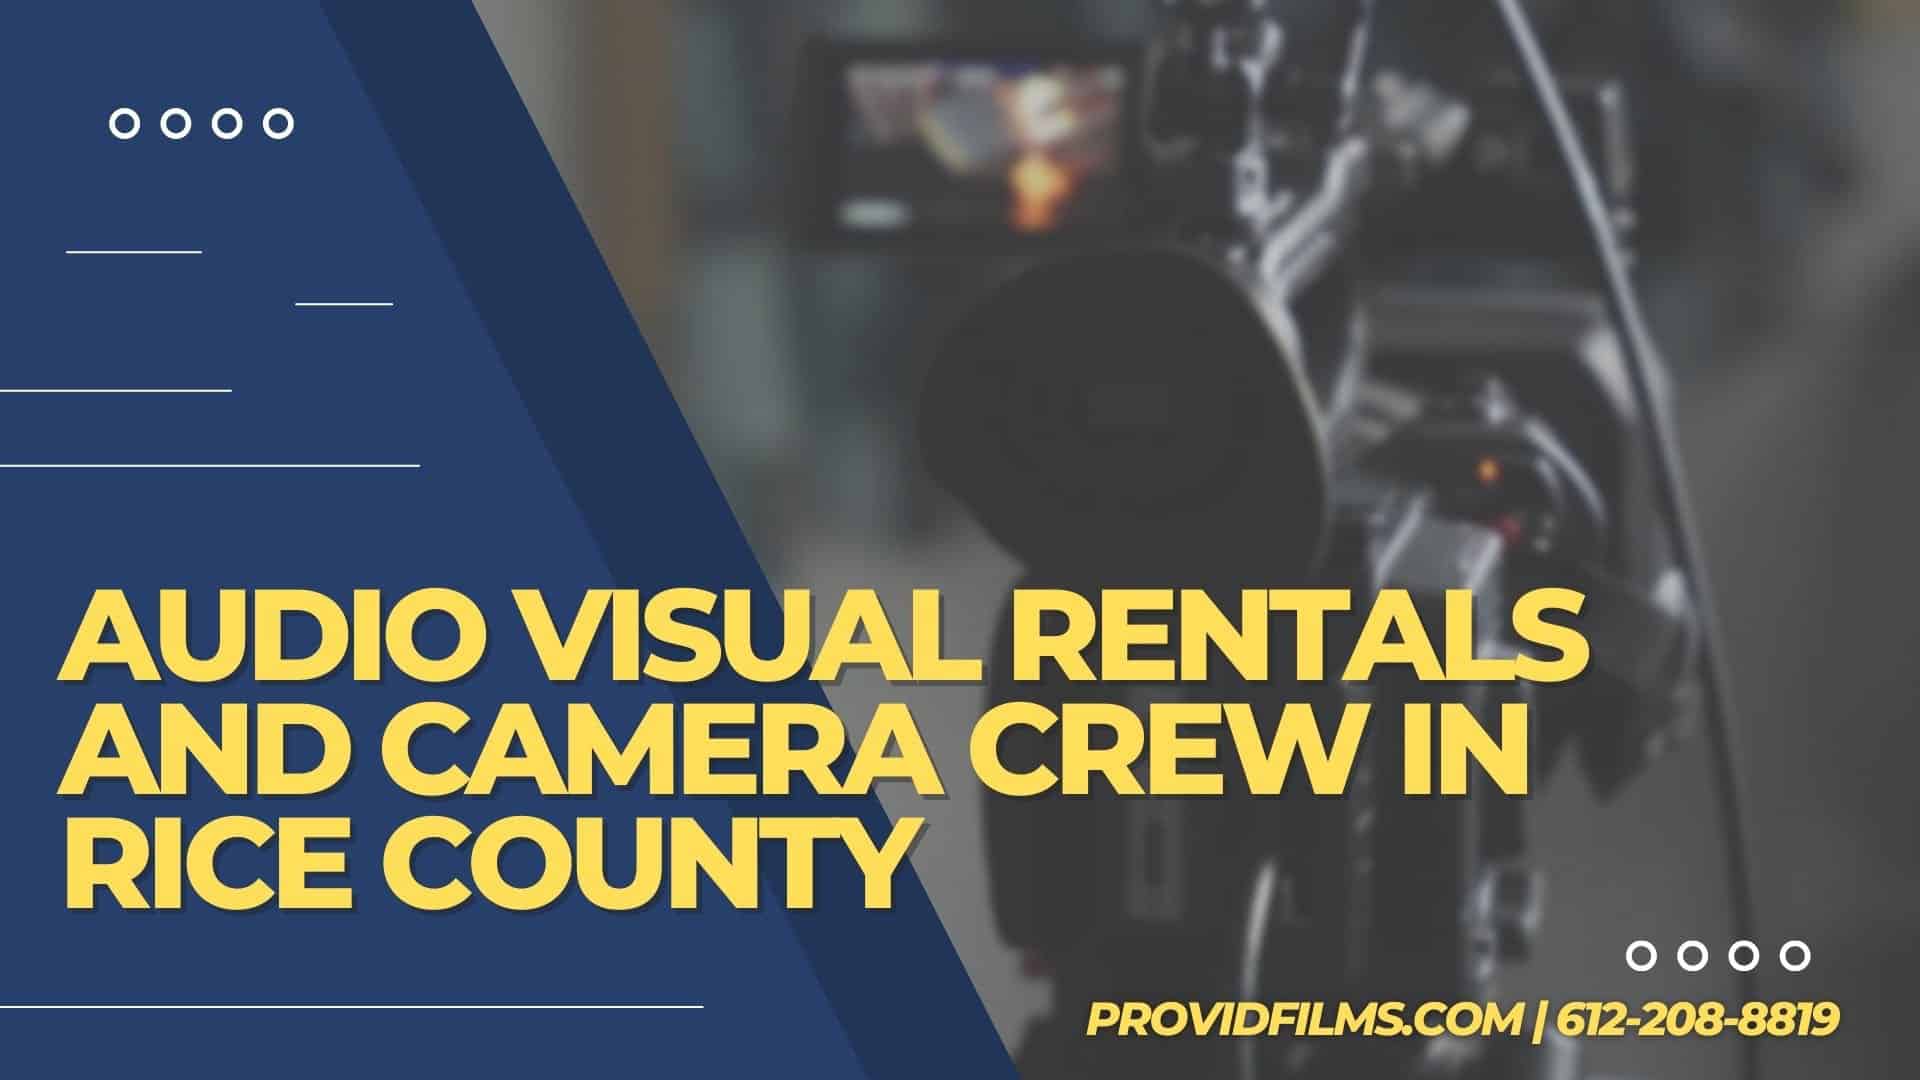 Graphic with a video camera crew with the text saying "AV Rental and Camera Crew in Rice County"